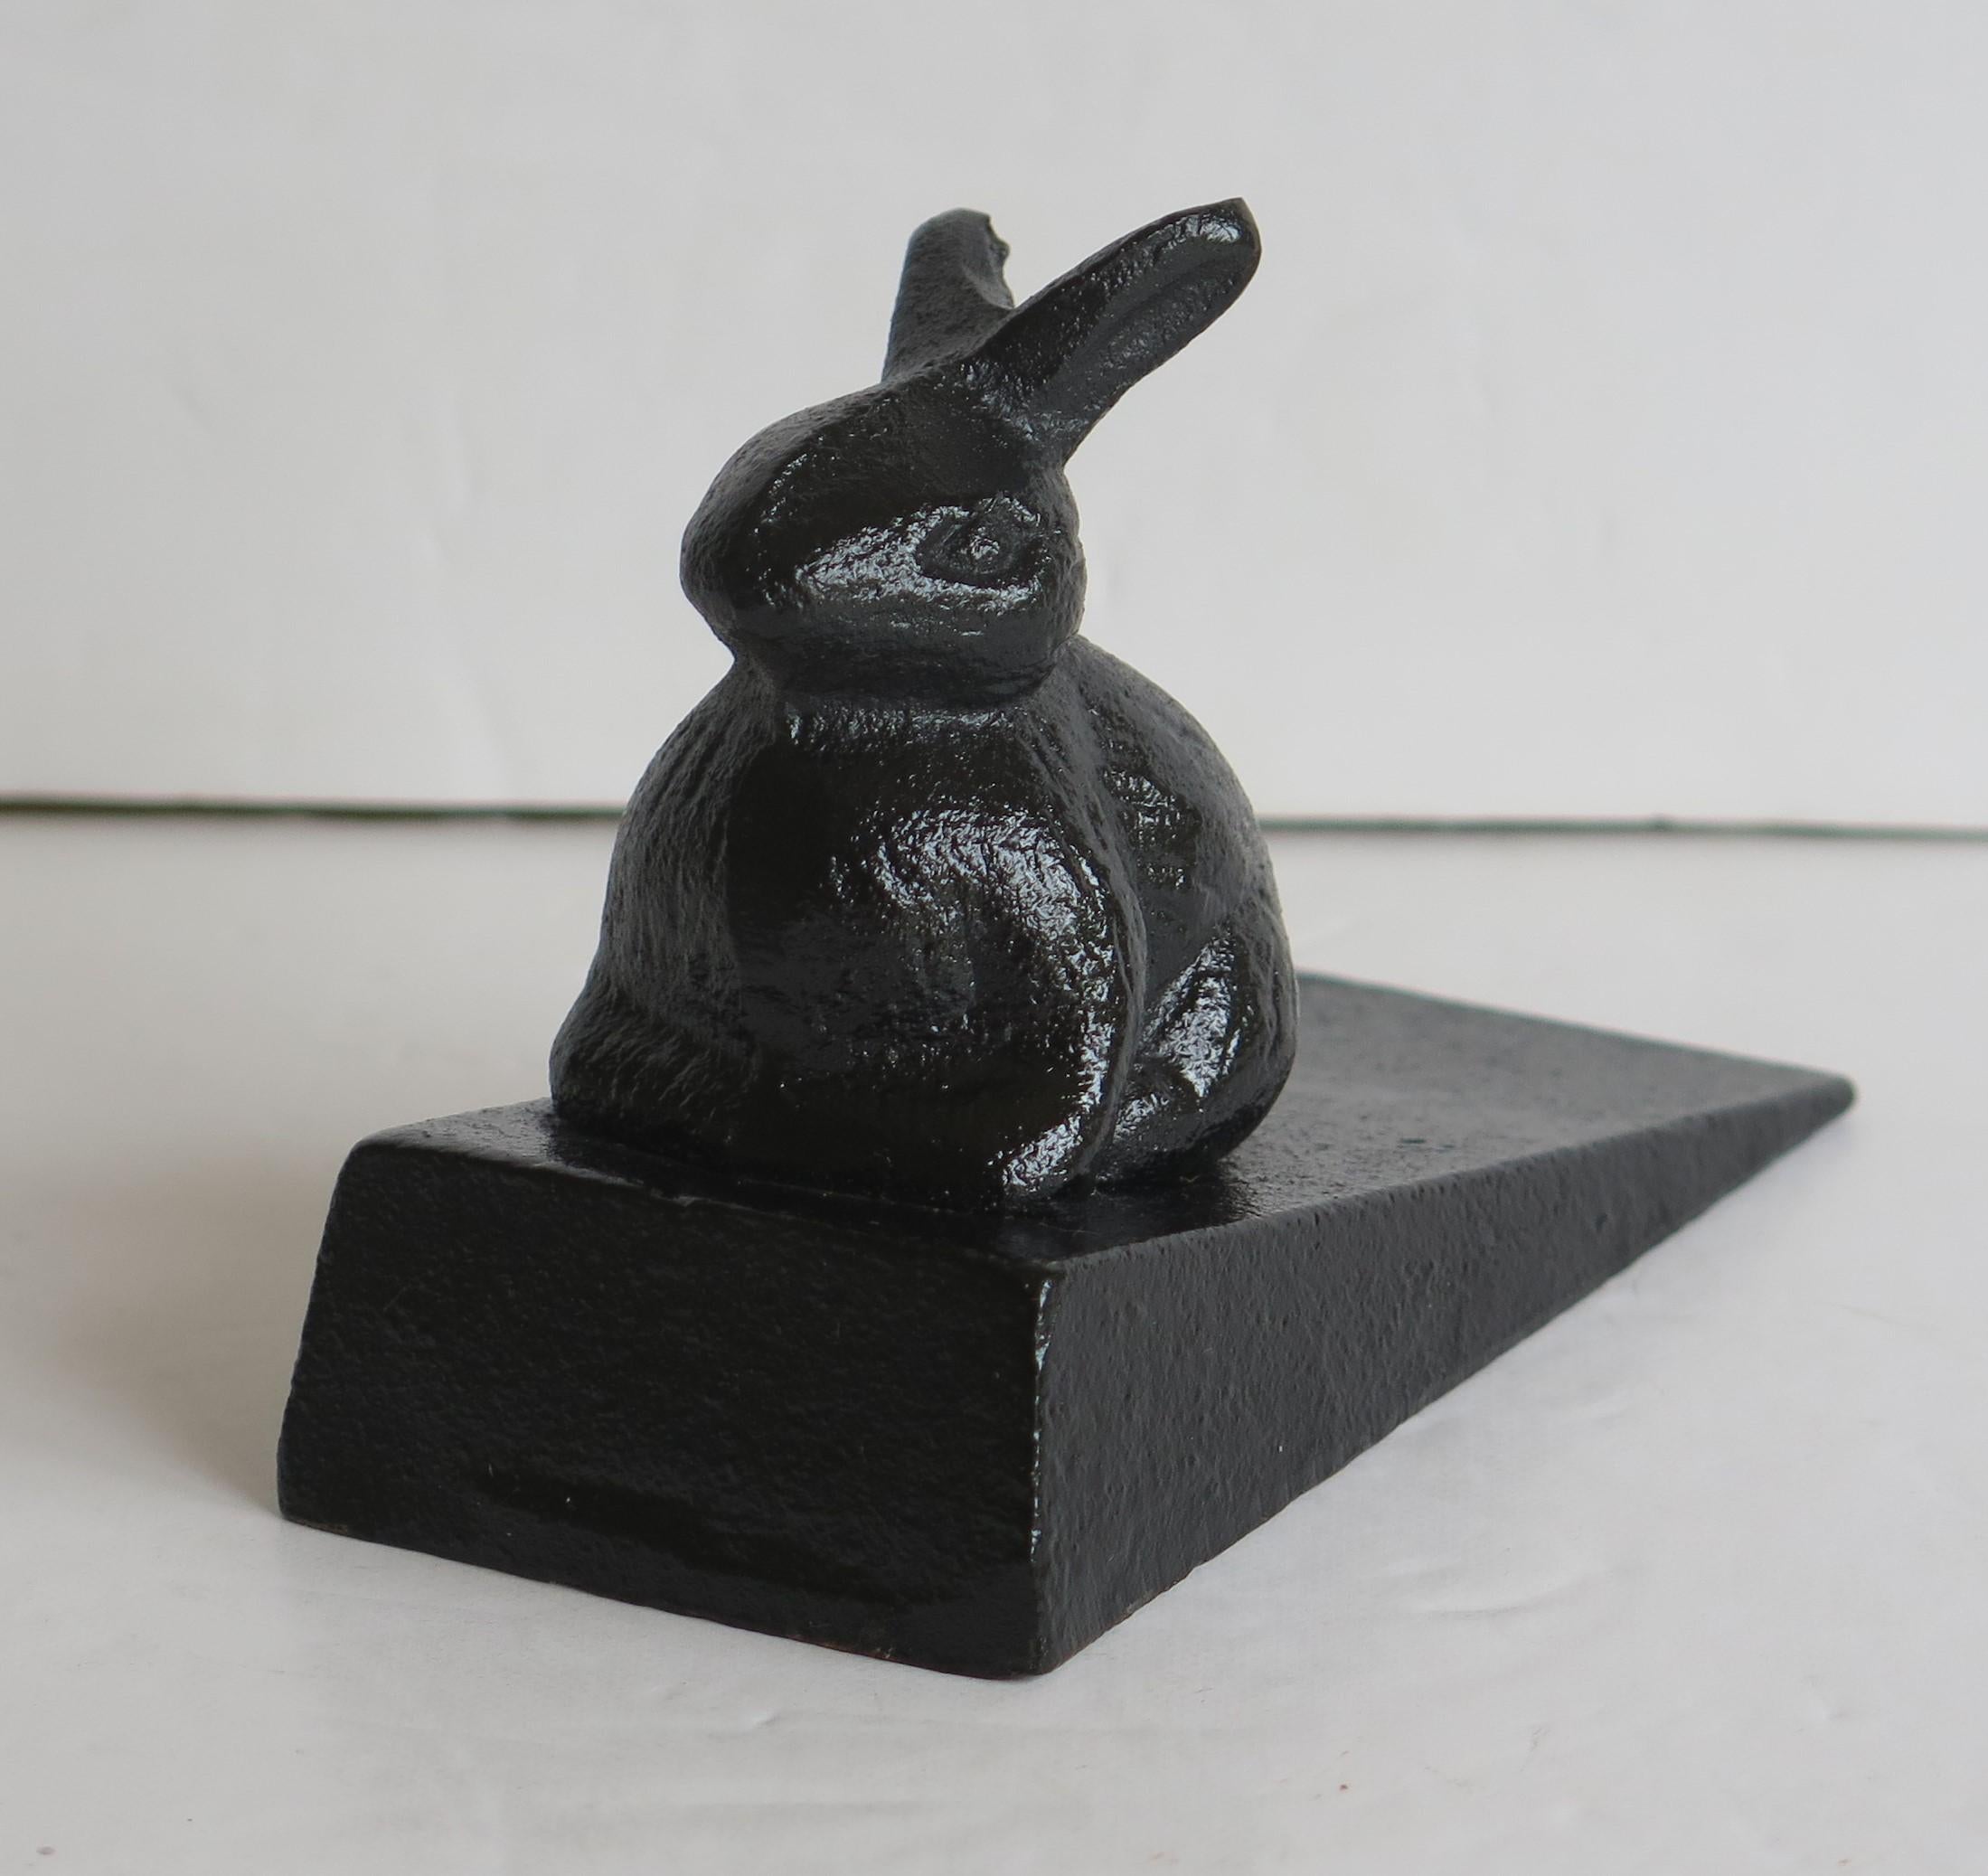 This is a very decorative door stop with a rabbit figure, all in cast iron and dating to the mid 20th century, circa 1940

The piece is well cast out of iron in two parts; the wedge shape base and the Rabbit animal figure, which attaches to the